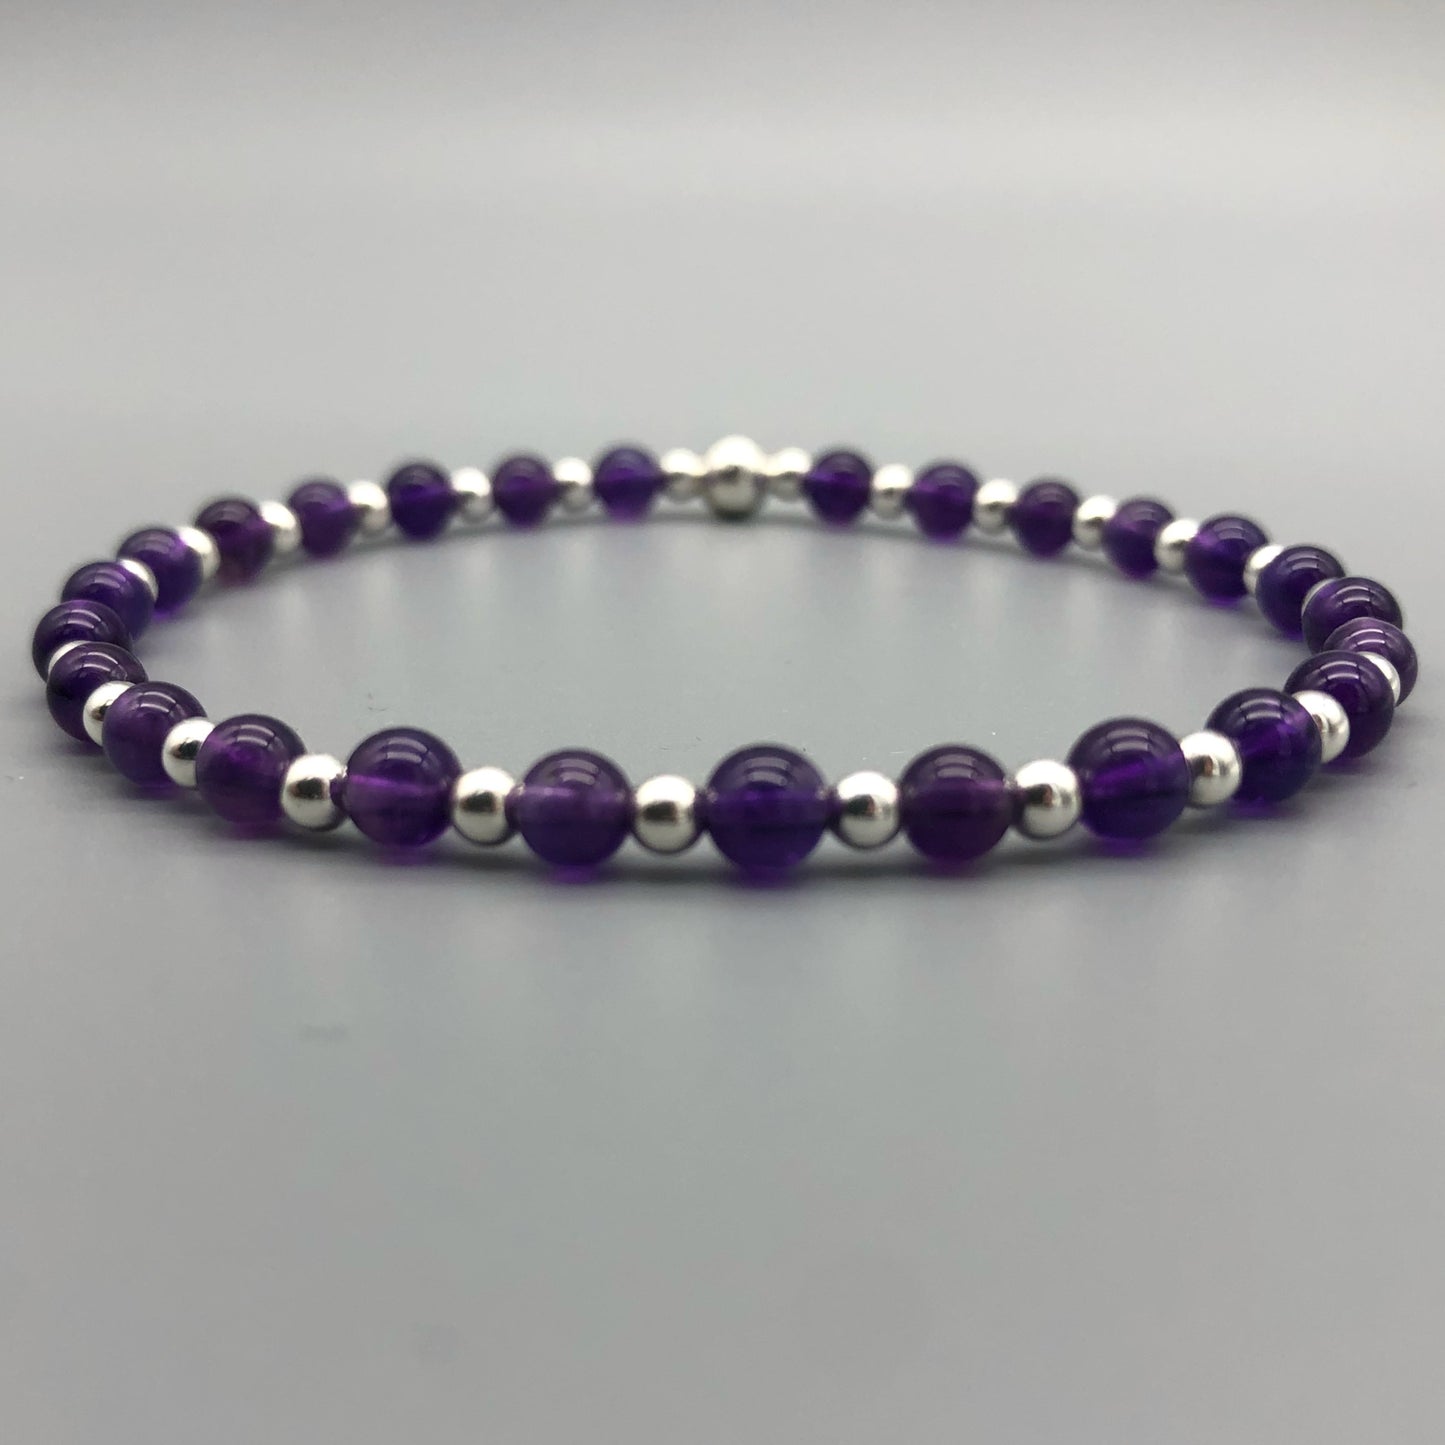 Amethyst Healing Crystal Sterling Silver Women's Stacking Bracelet by My Silver Wish